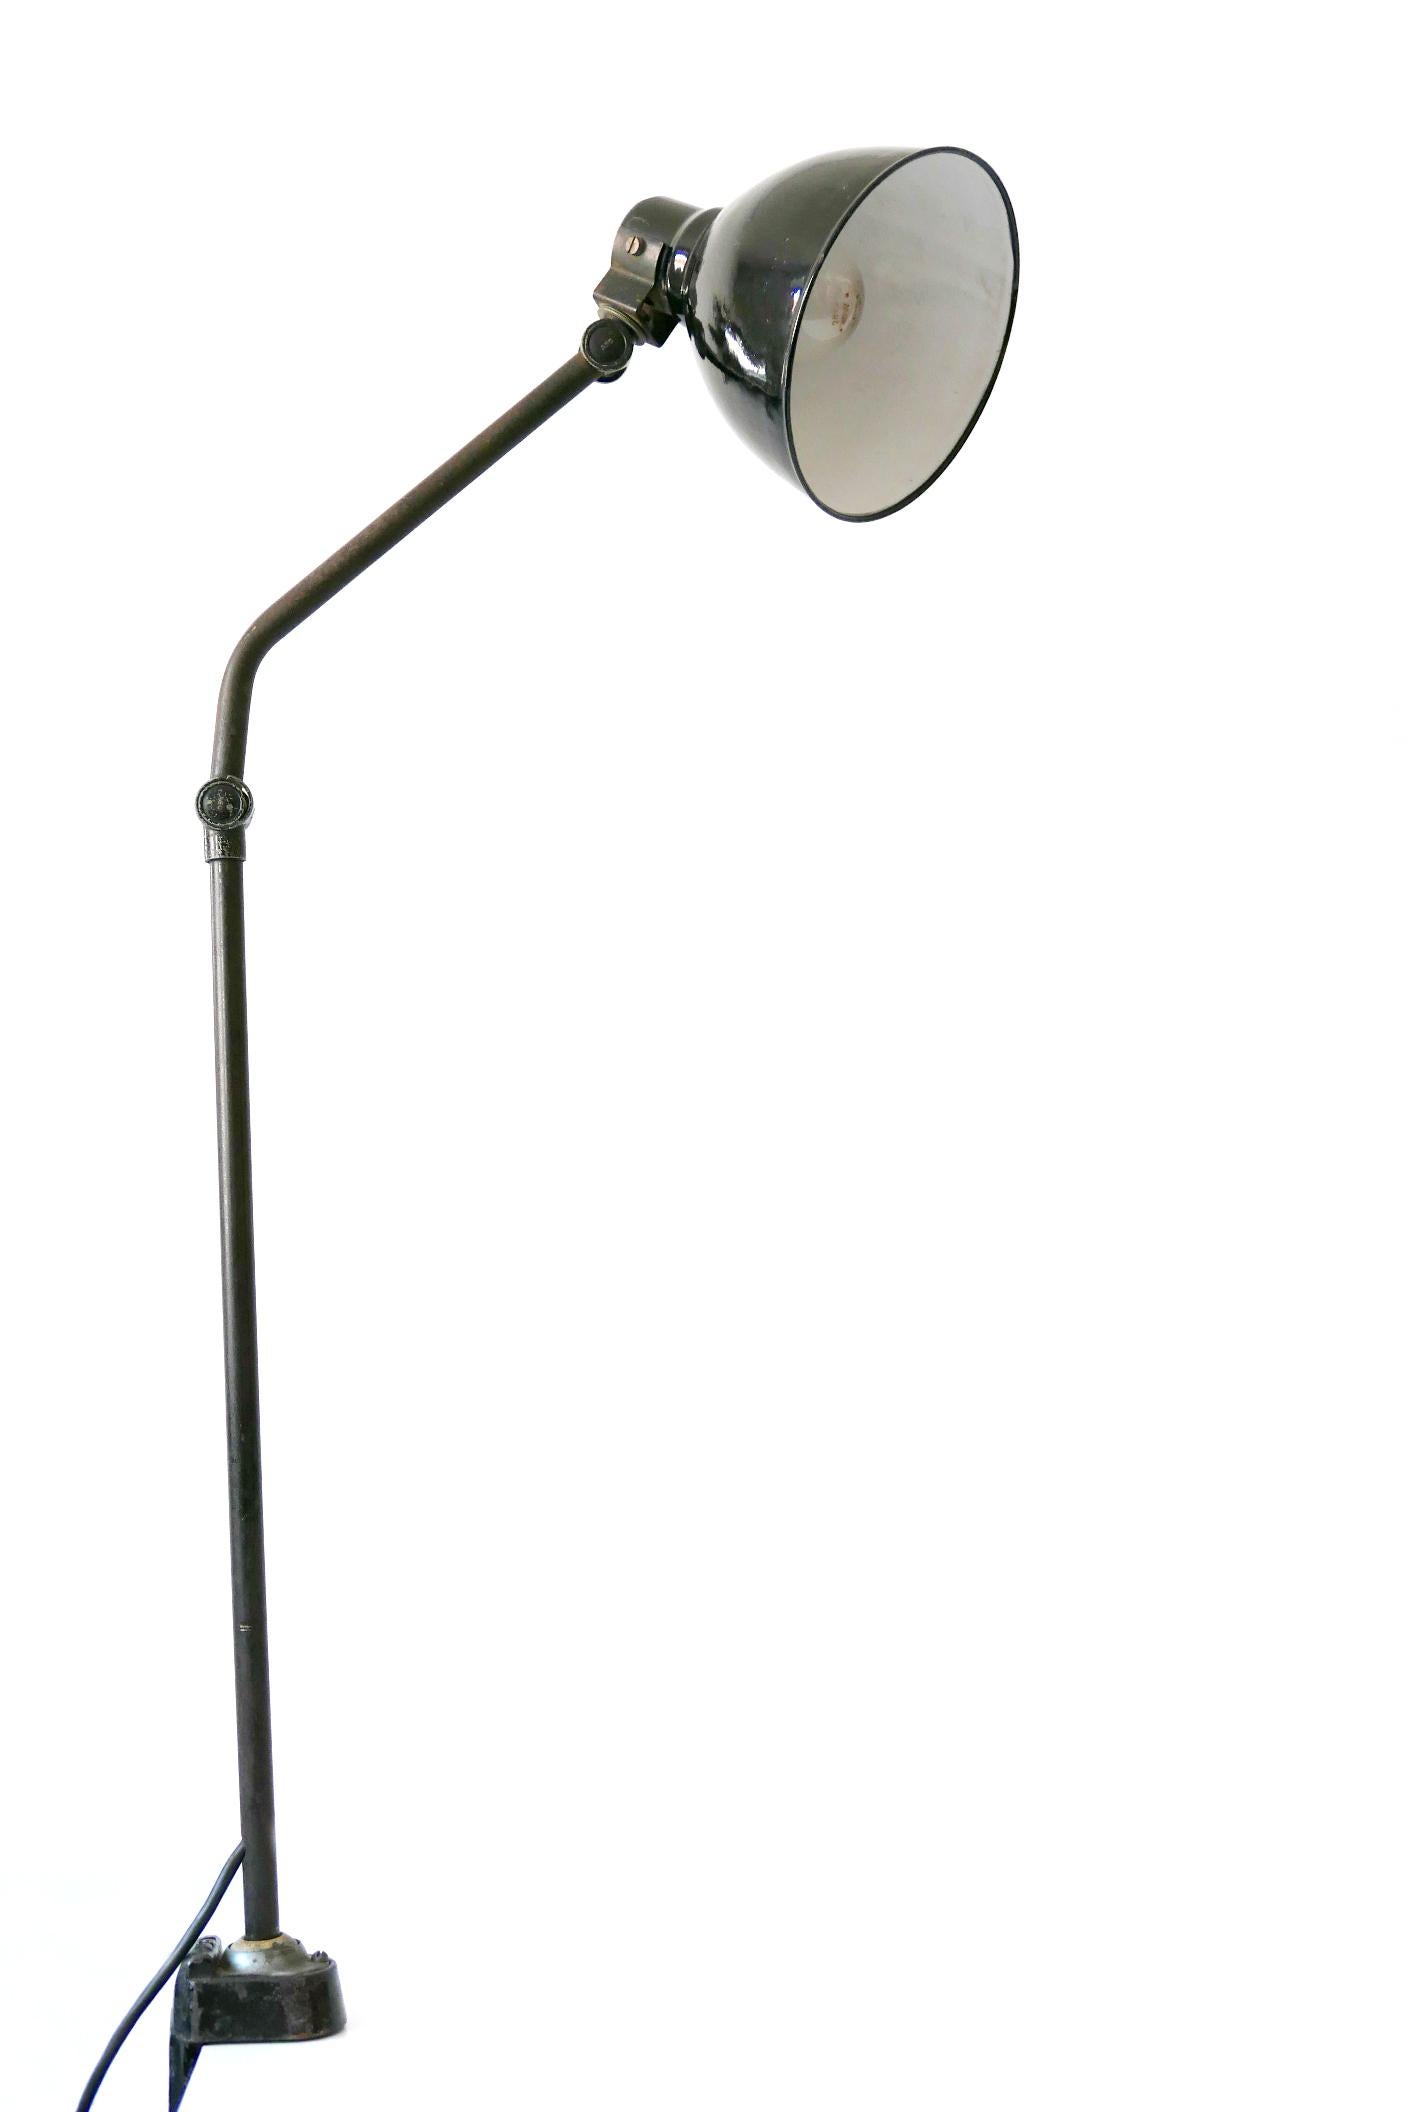 Early 20th Century Bauhaus Task Lamp or Clamp Table Light by Peter Behrens for AEG 1920s, Germany